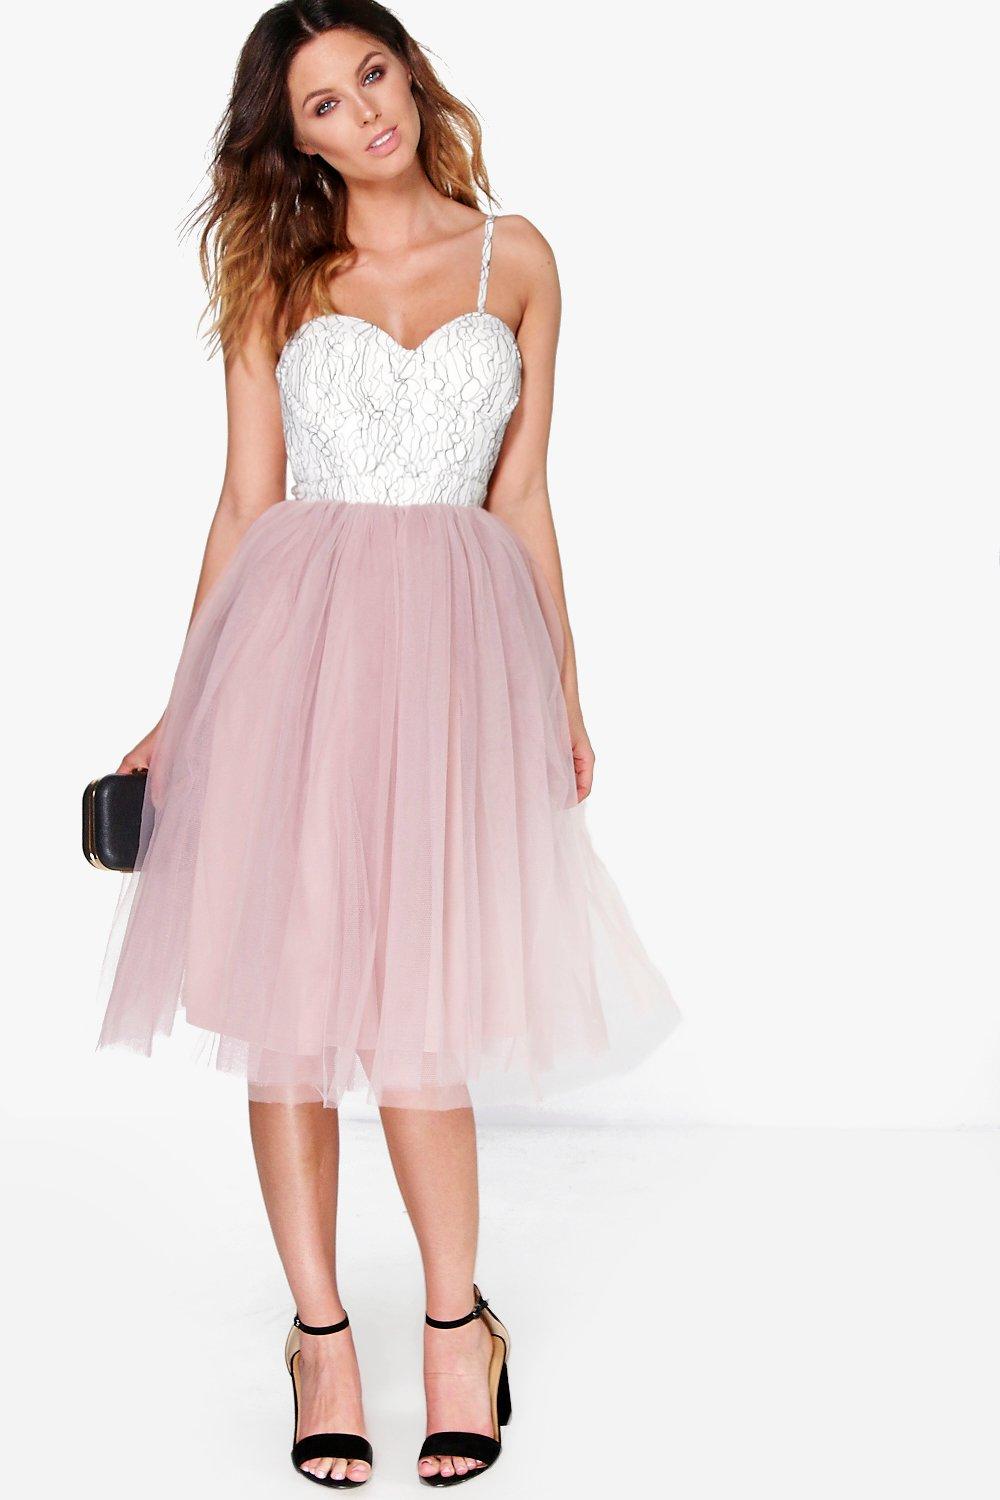 A Tulle Dress